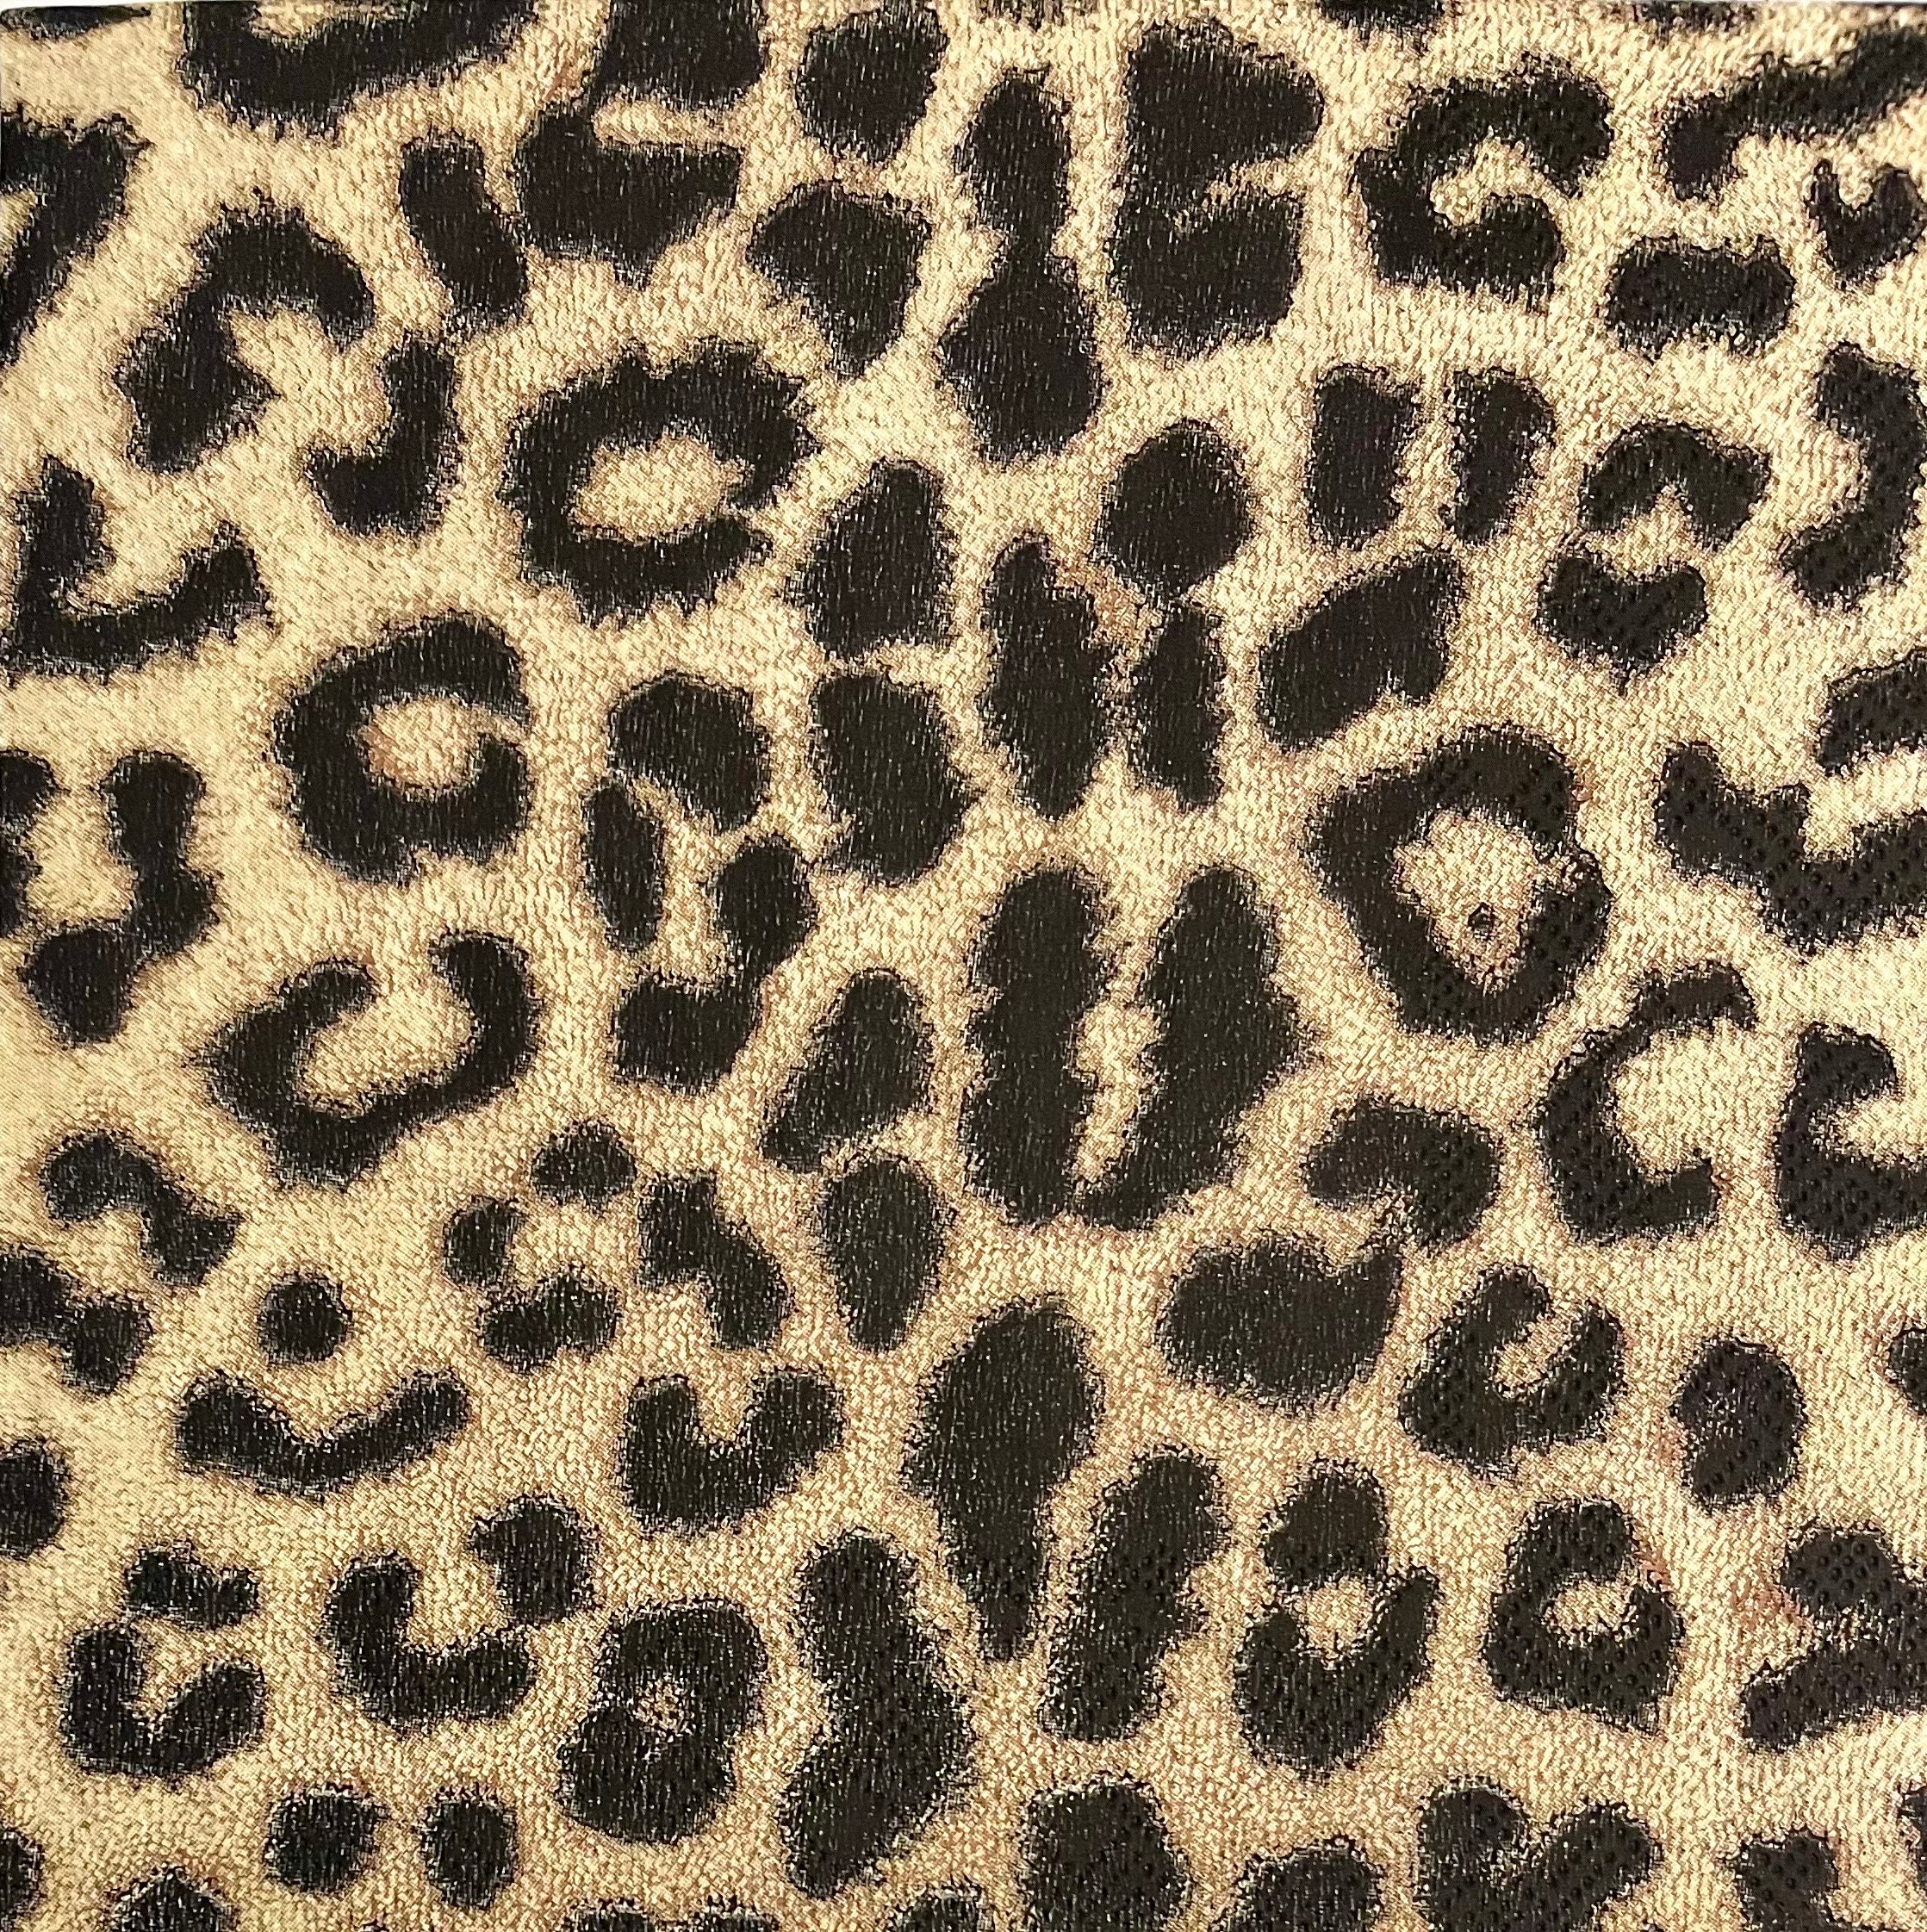 Leopard Tissue Wrap Animal Lovers Metallic Gold and Black 15x20 / 20x30  Packaging Gift Wrapping Paper Supplies Decoupage Kitschy Chic 